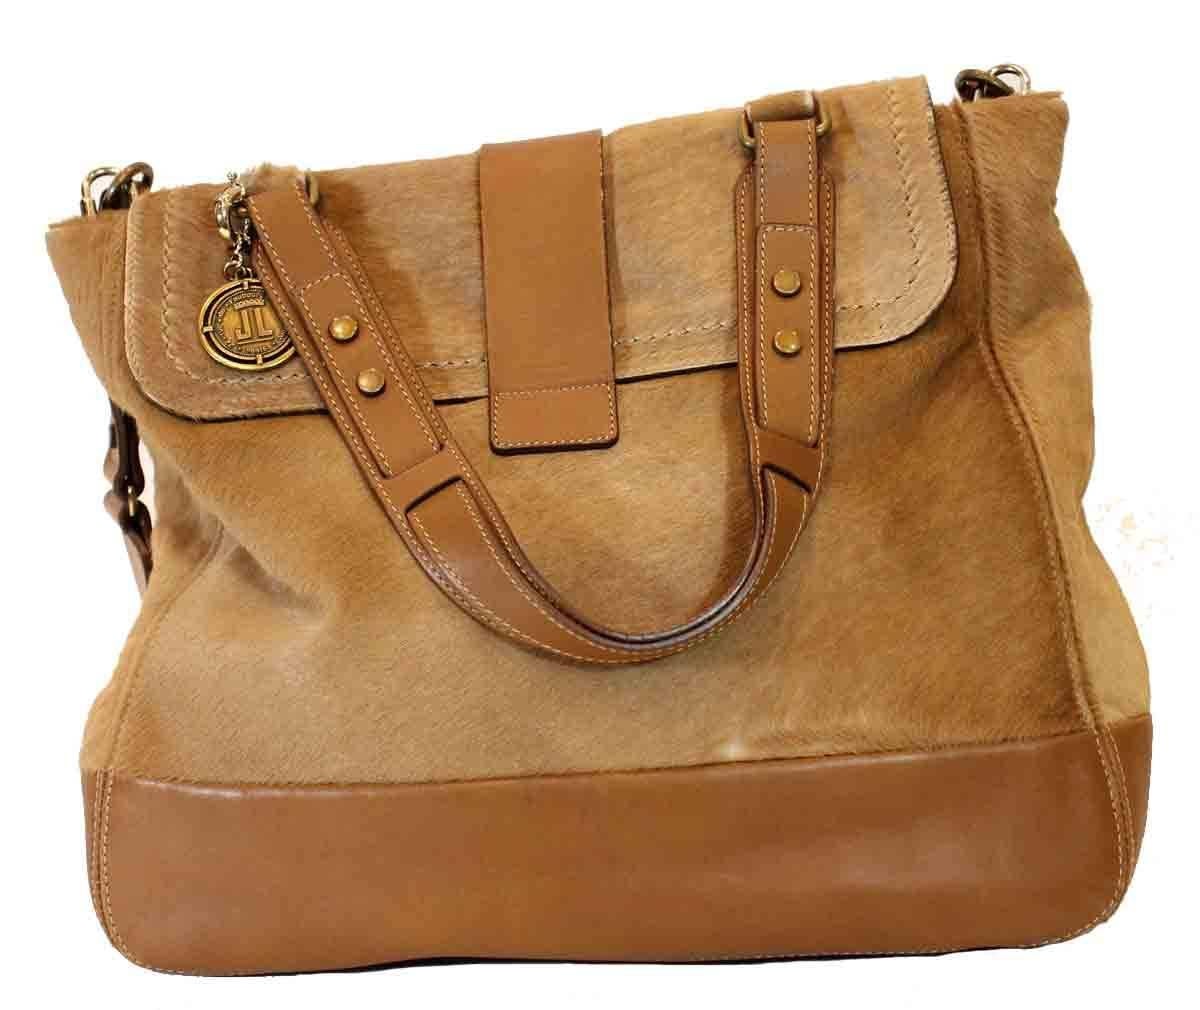 Tan leather and camel calf hair. Bronze and gold hardware. Twist lock at fold-over flap. Top handle. Detachable shoulder strap. One interior zippered pocket.